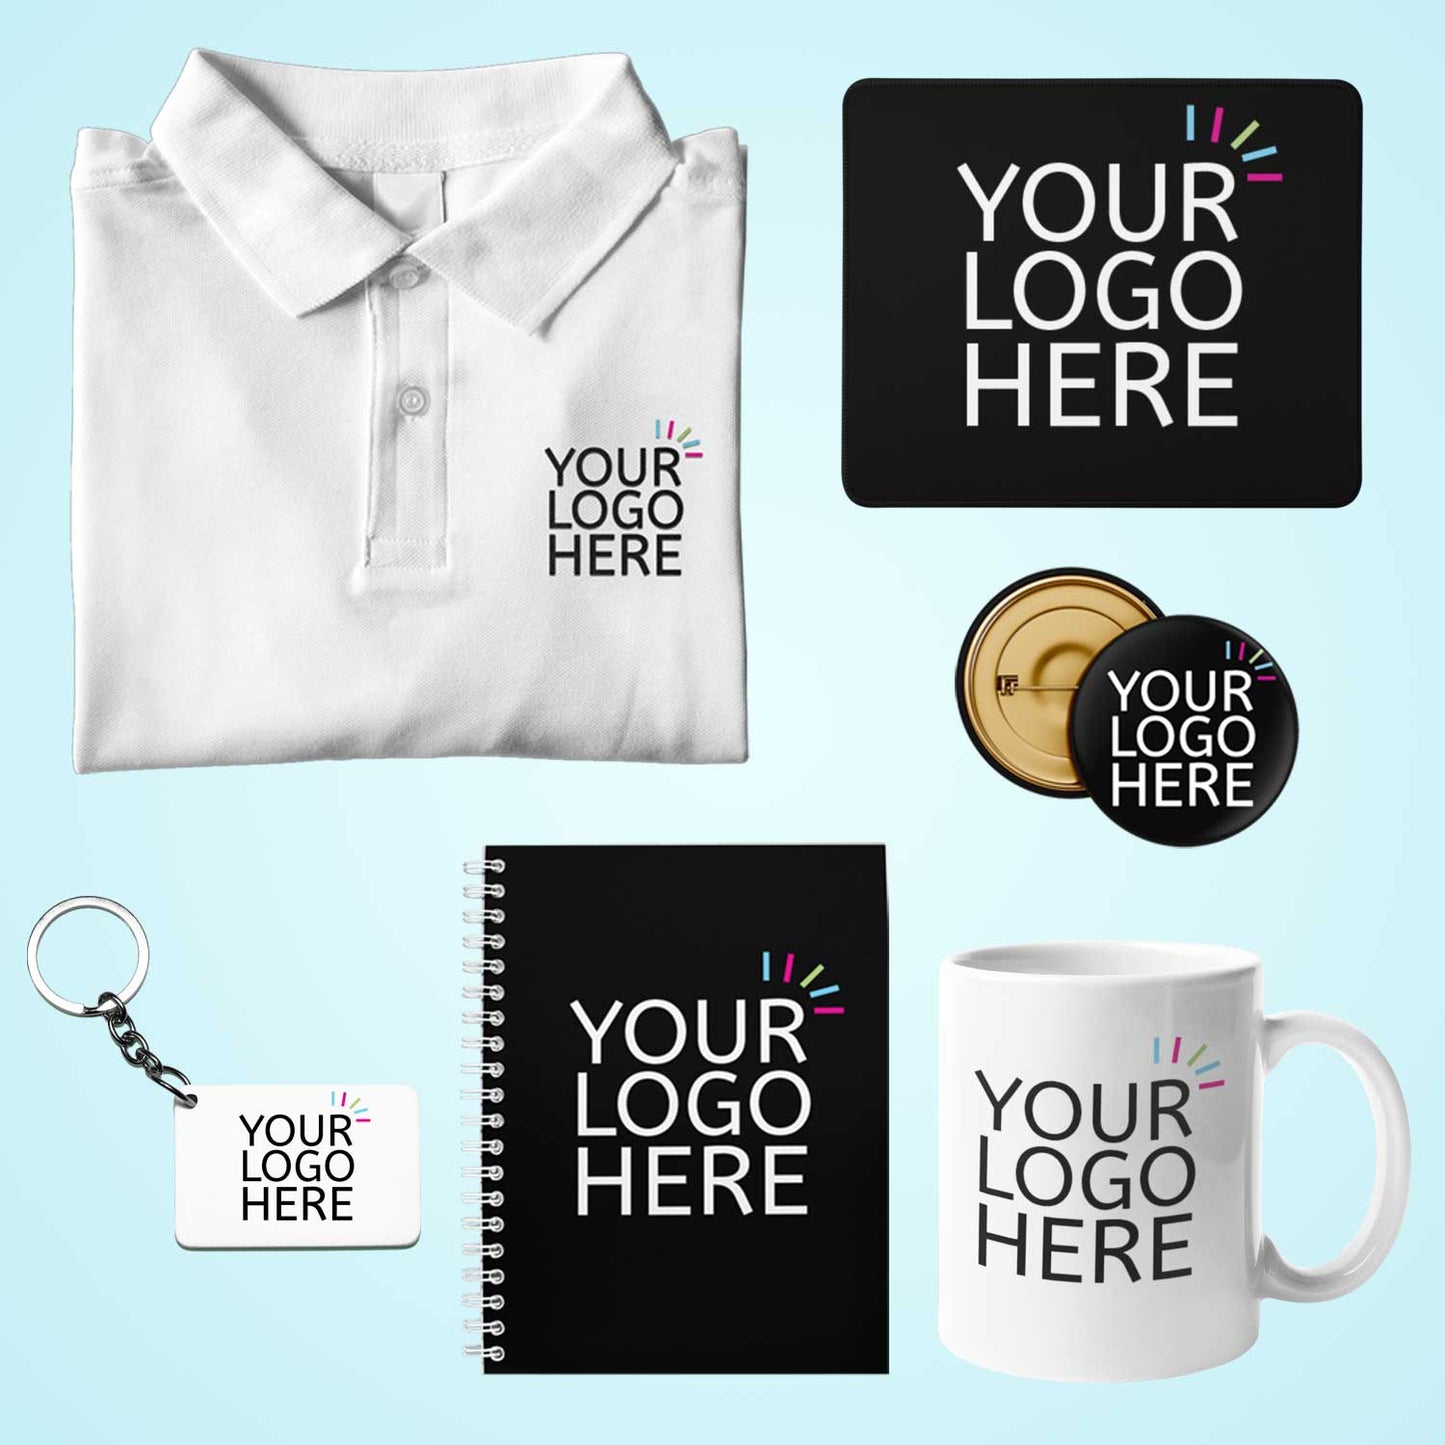 custom customized customised personalized personalised customizable customisable gifts ideas gift unique t-shirt badge mouse pad coffee mug keychain notepad notebook corporate gifting welcome kit employees clients online india products merchandise merch logo design shirts combo